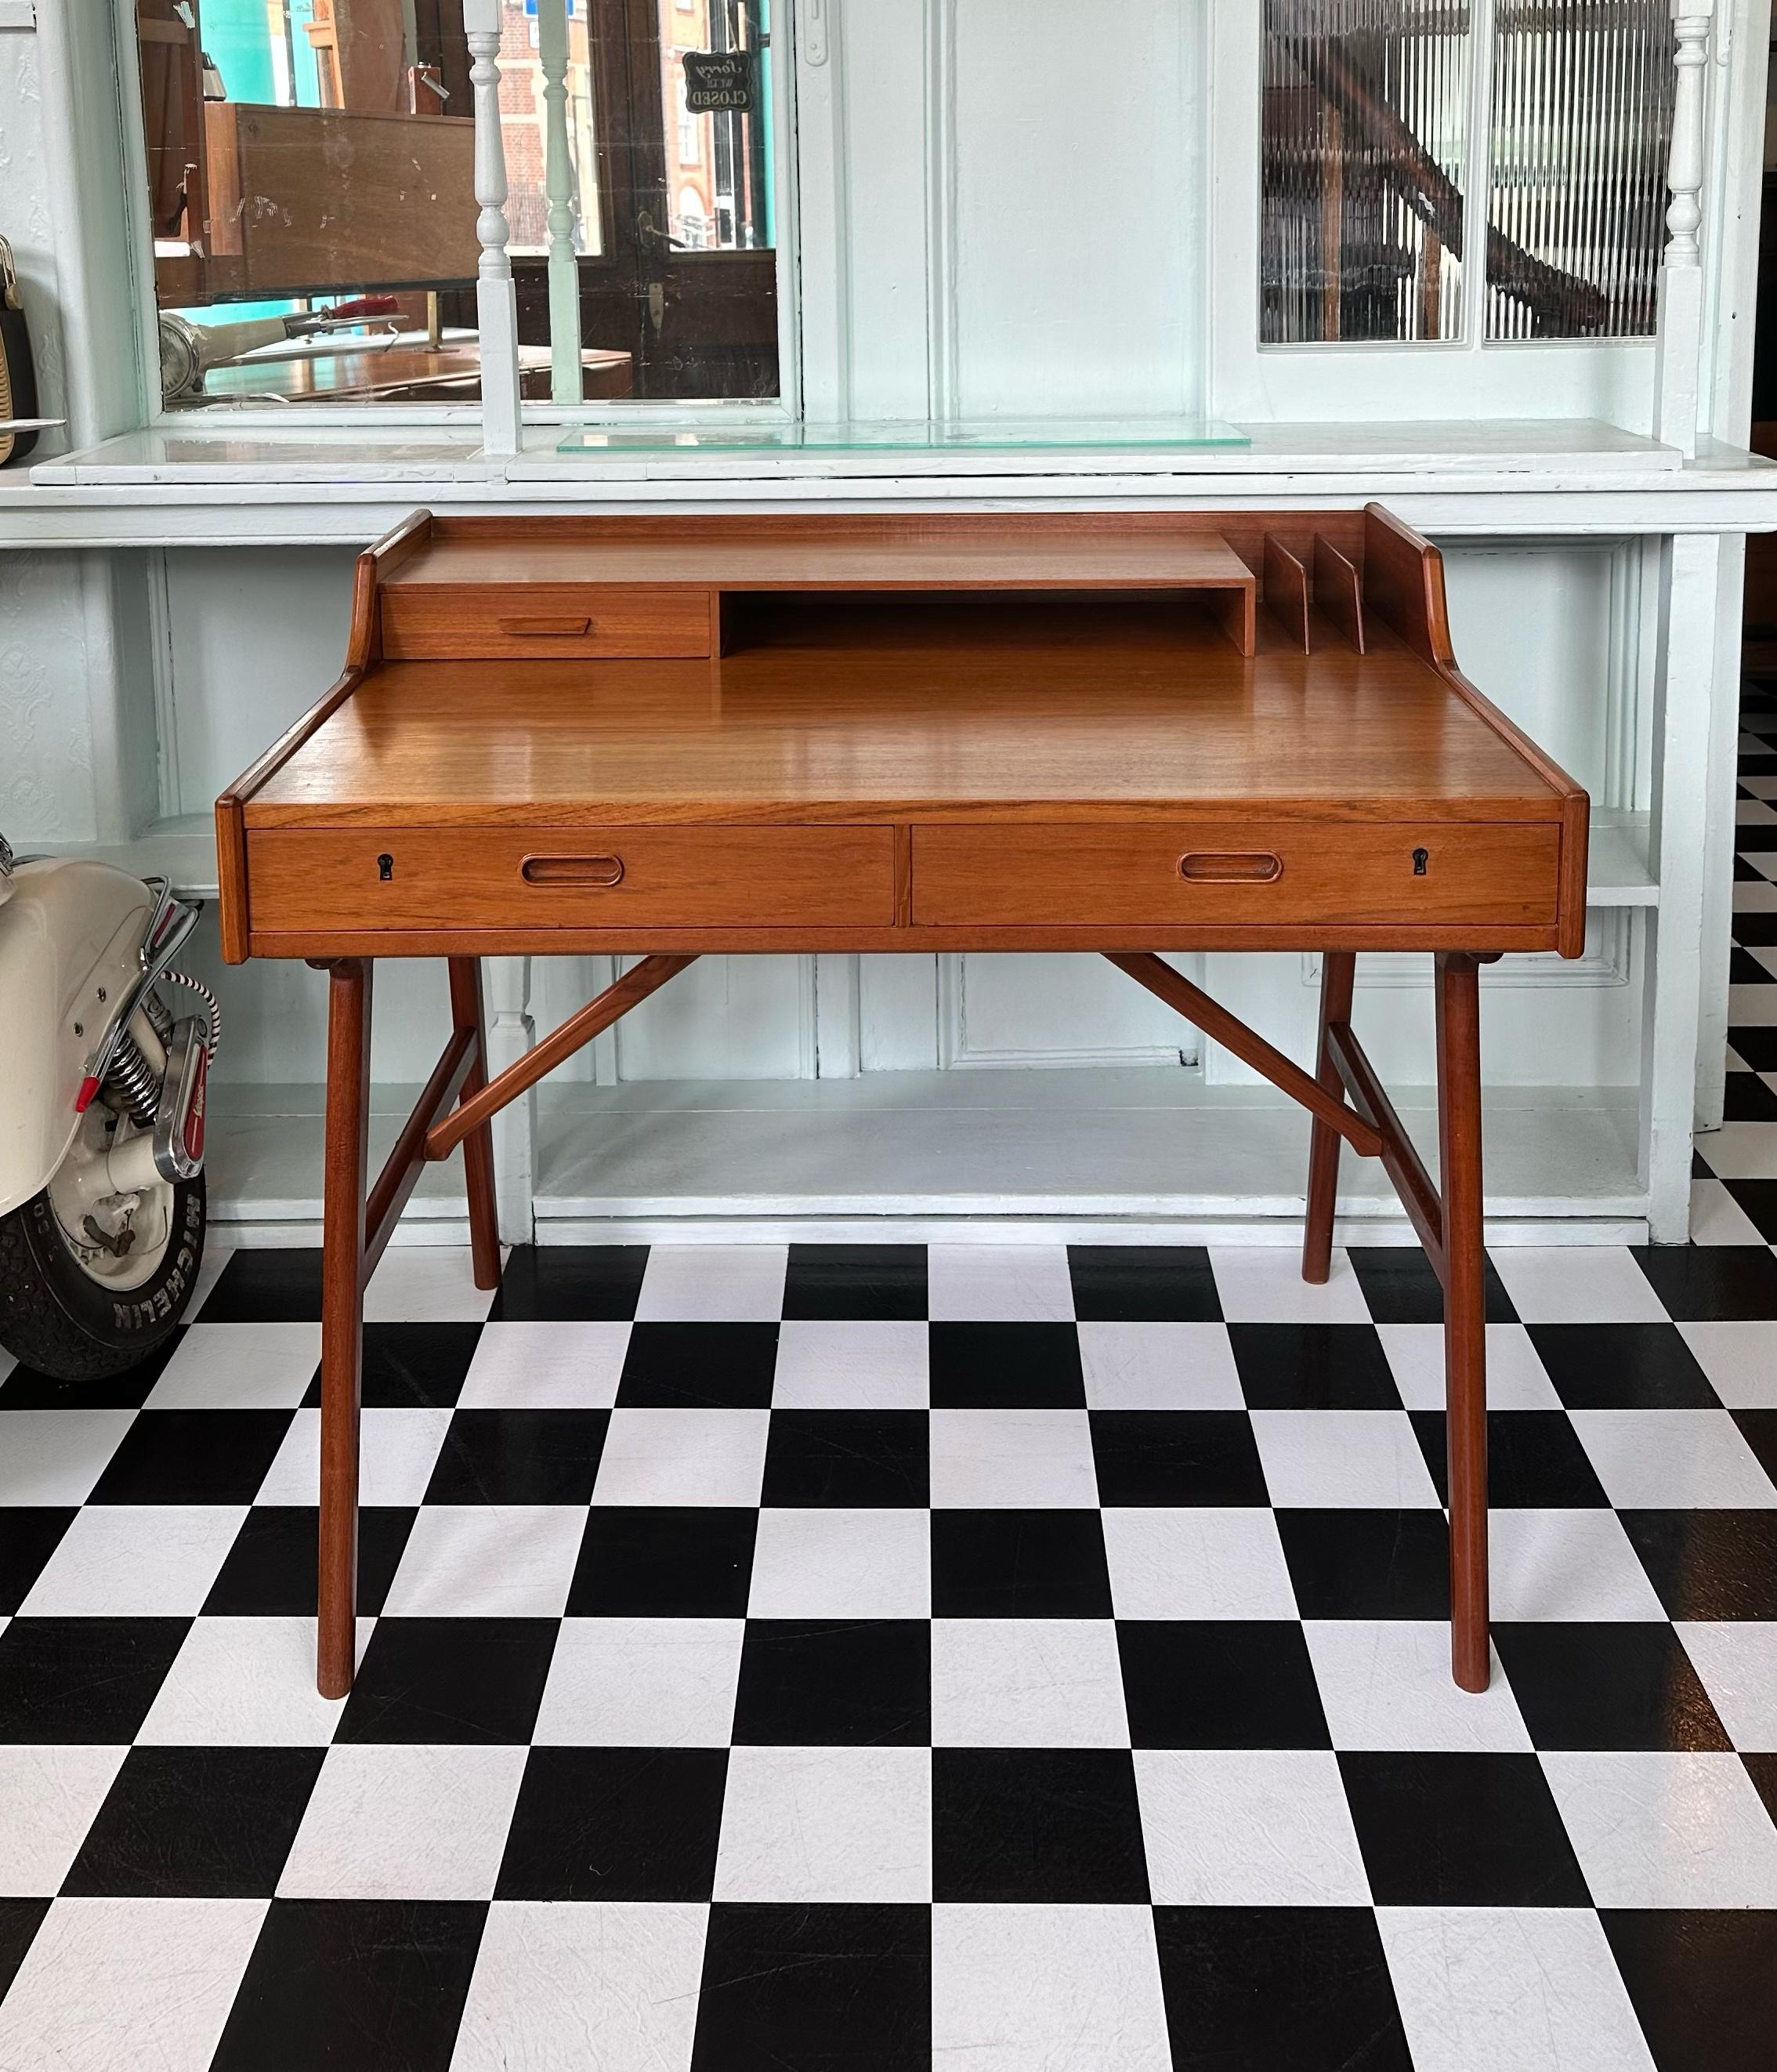 We’re happy to provide our own competitive shipping quotes with trusted couriers. Please message us with your postcode for a more accurate price. Thank you.

Fabulous and super stylish mid-century Danish teak desk. It was designed by Arne Wahl